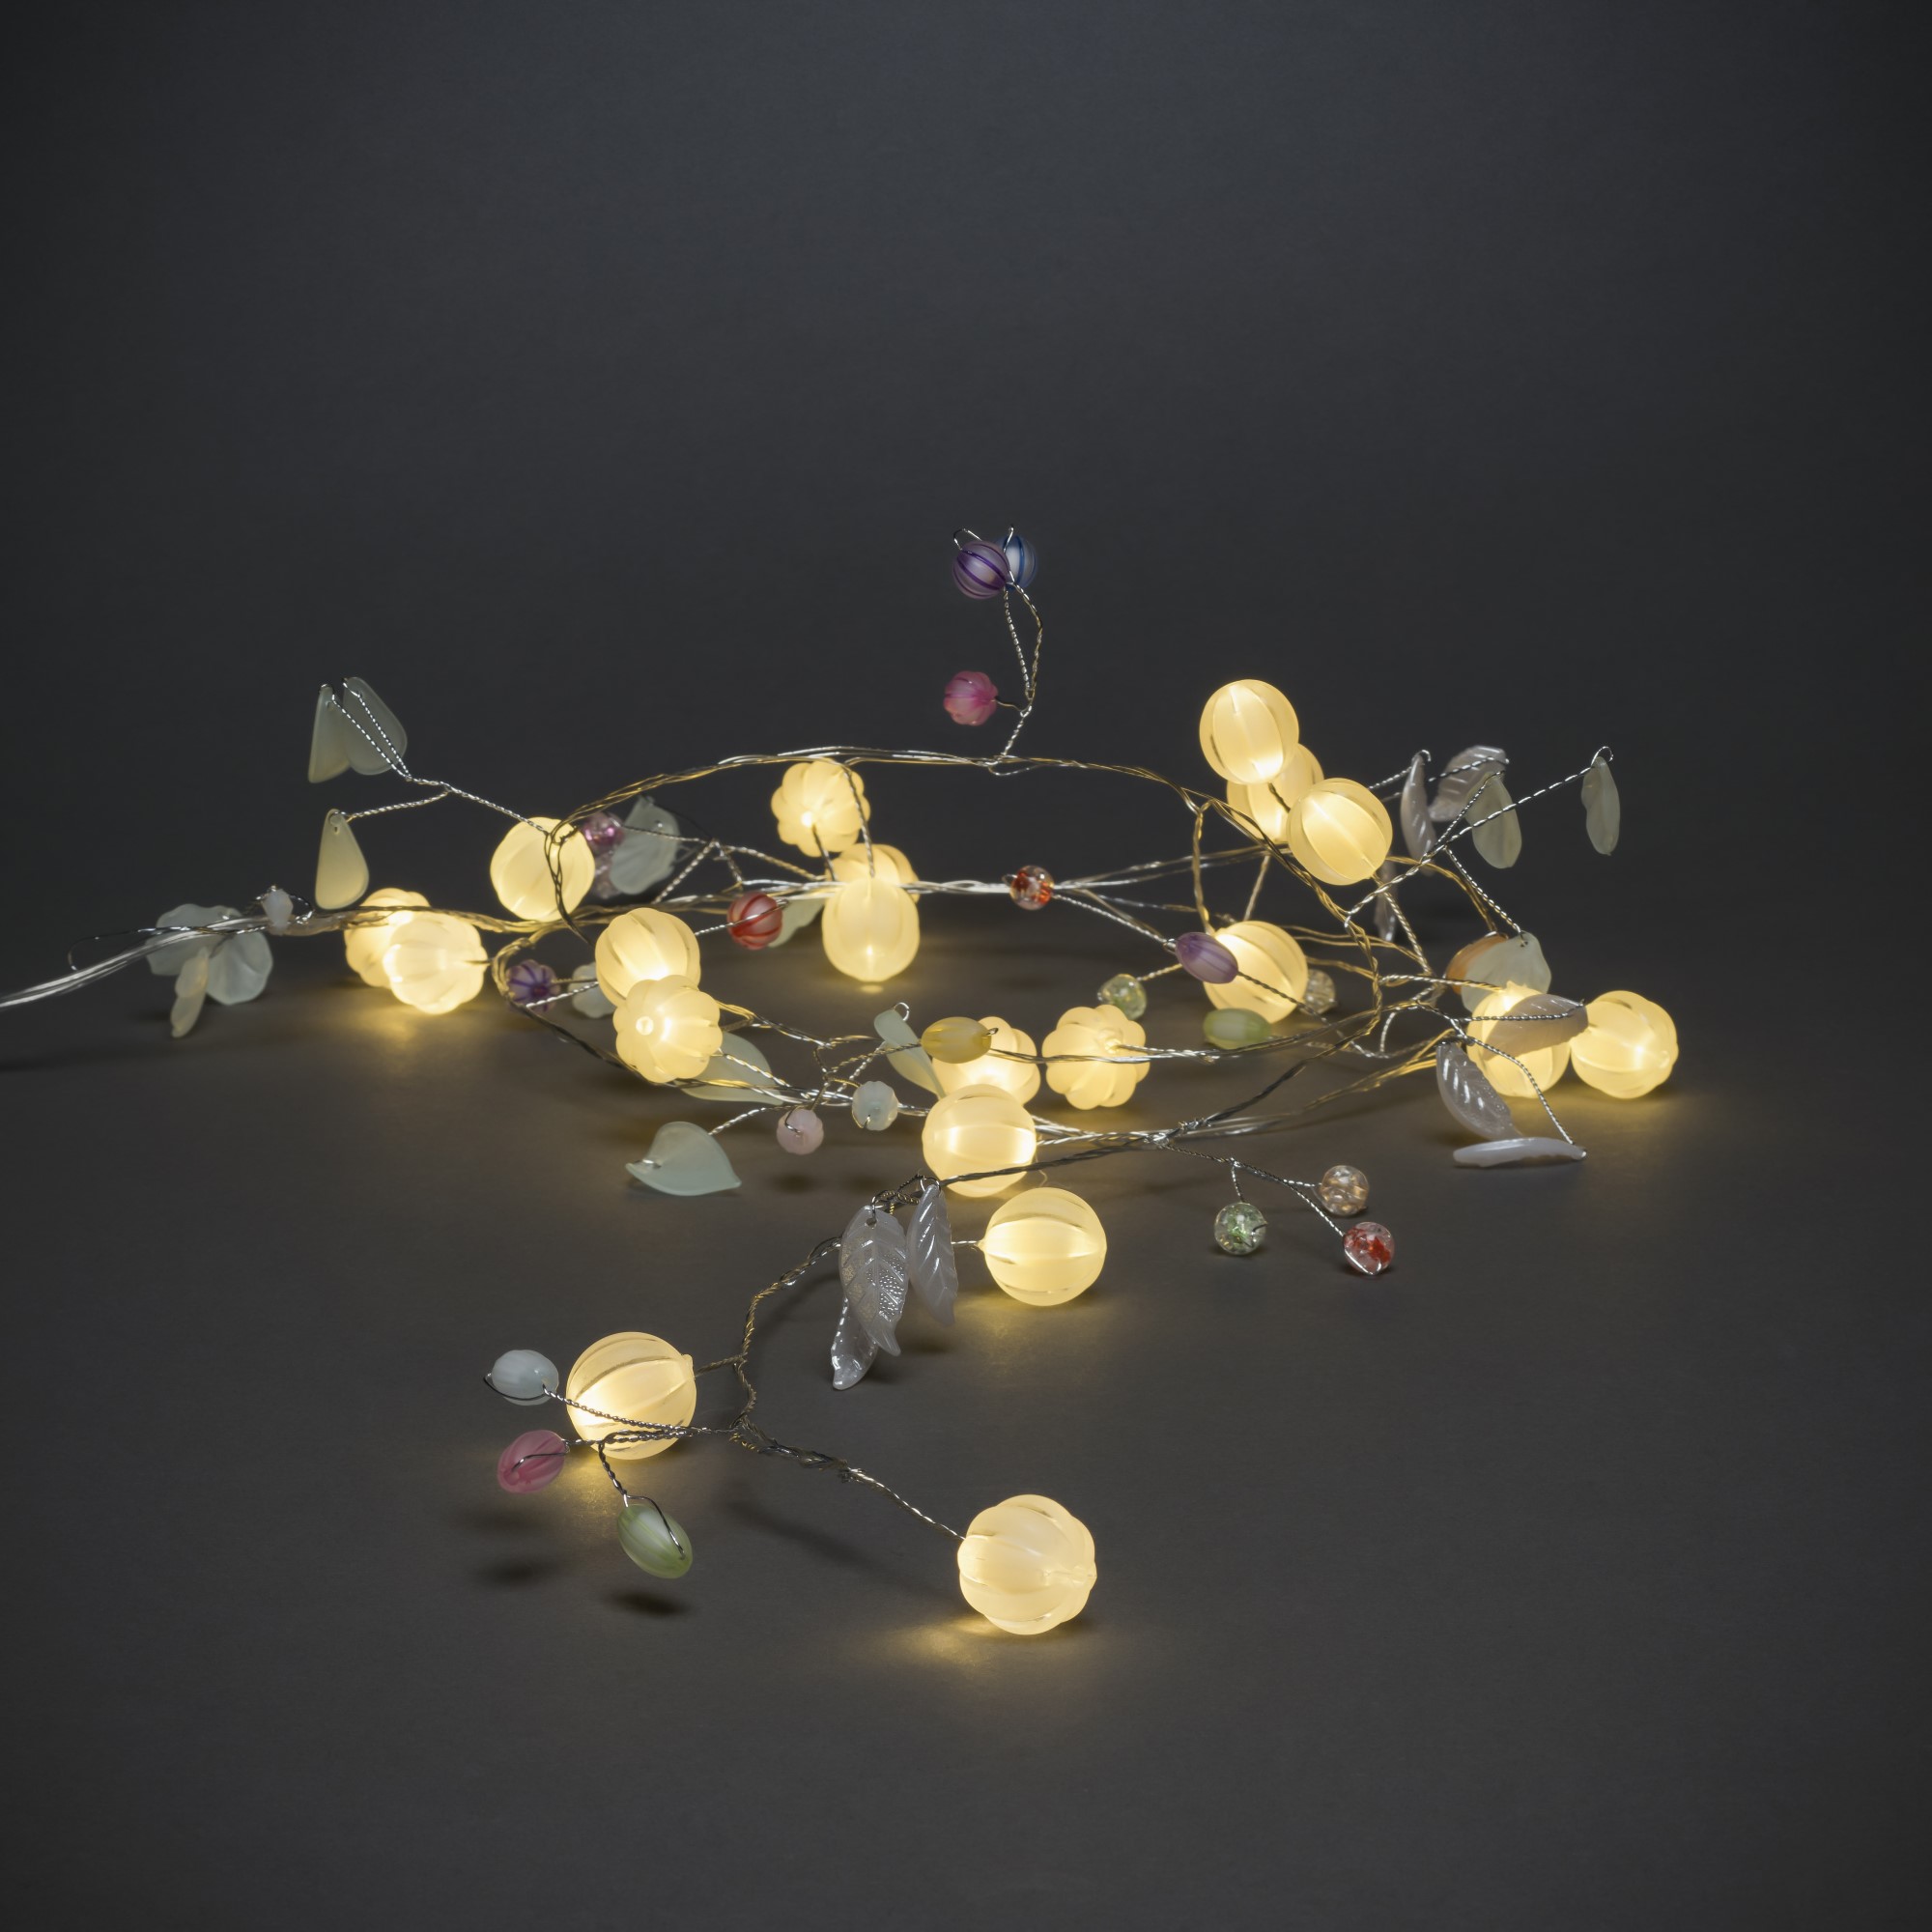 Konstsmide LED Decoration Light Chain Leaves and Fruits, 20 warm white LEDs, 6h timer, battery-operated 3lm